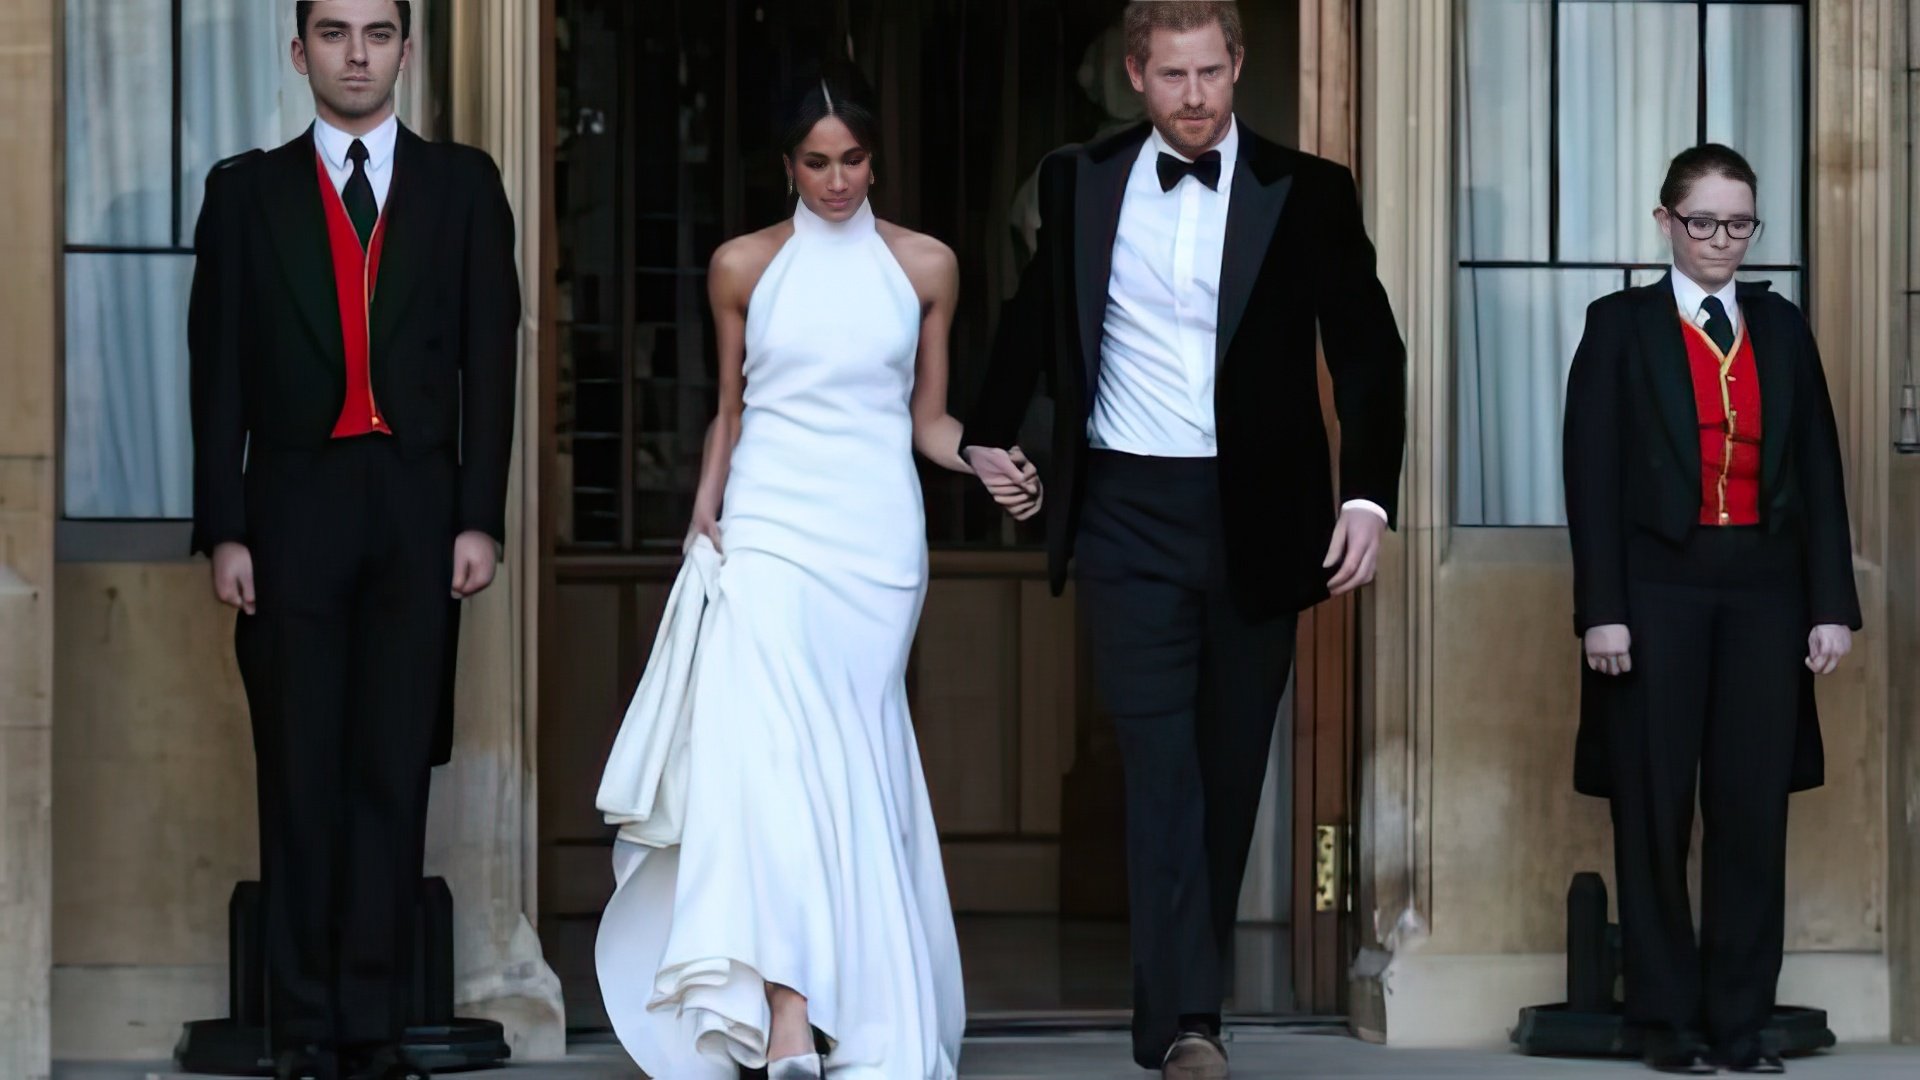 After the Wedding, Meghan Markle Became the Duchess of Sussex